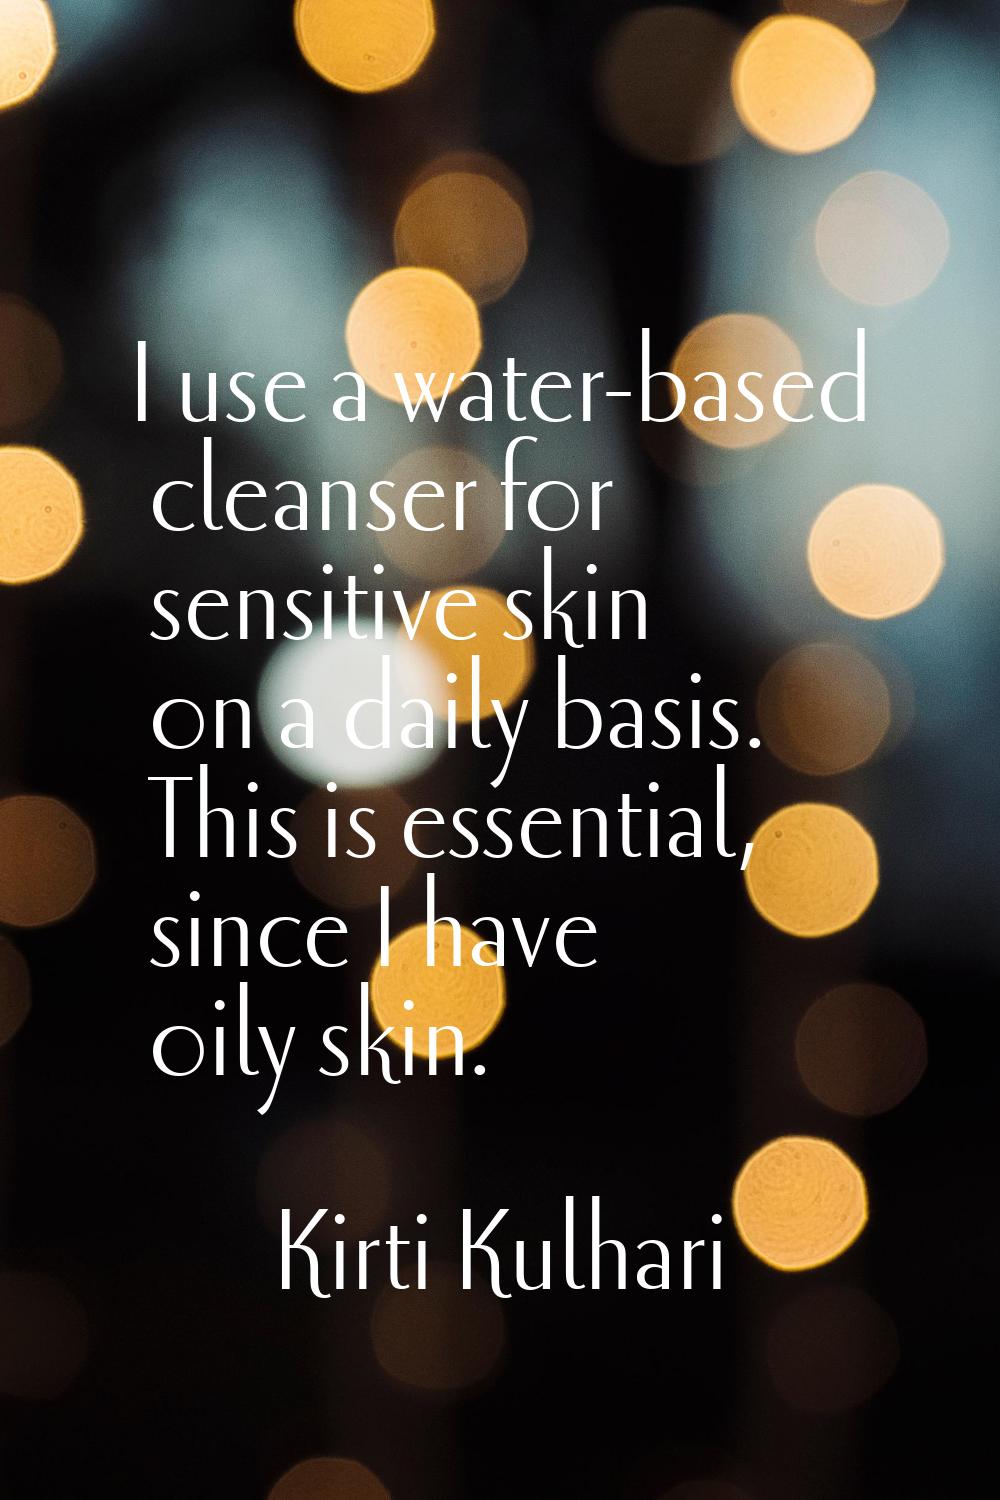 I use a water-based cleanser for sensitive skin on a daily basis. This is essential, since I have o